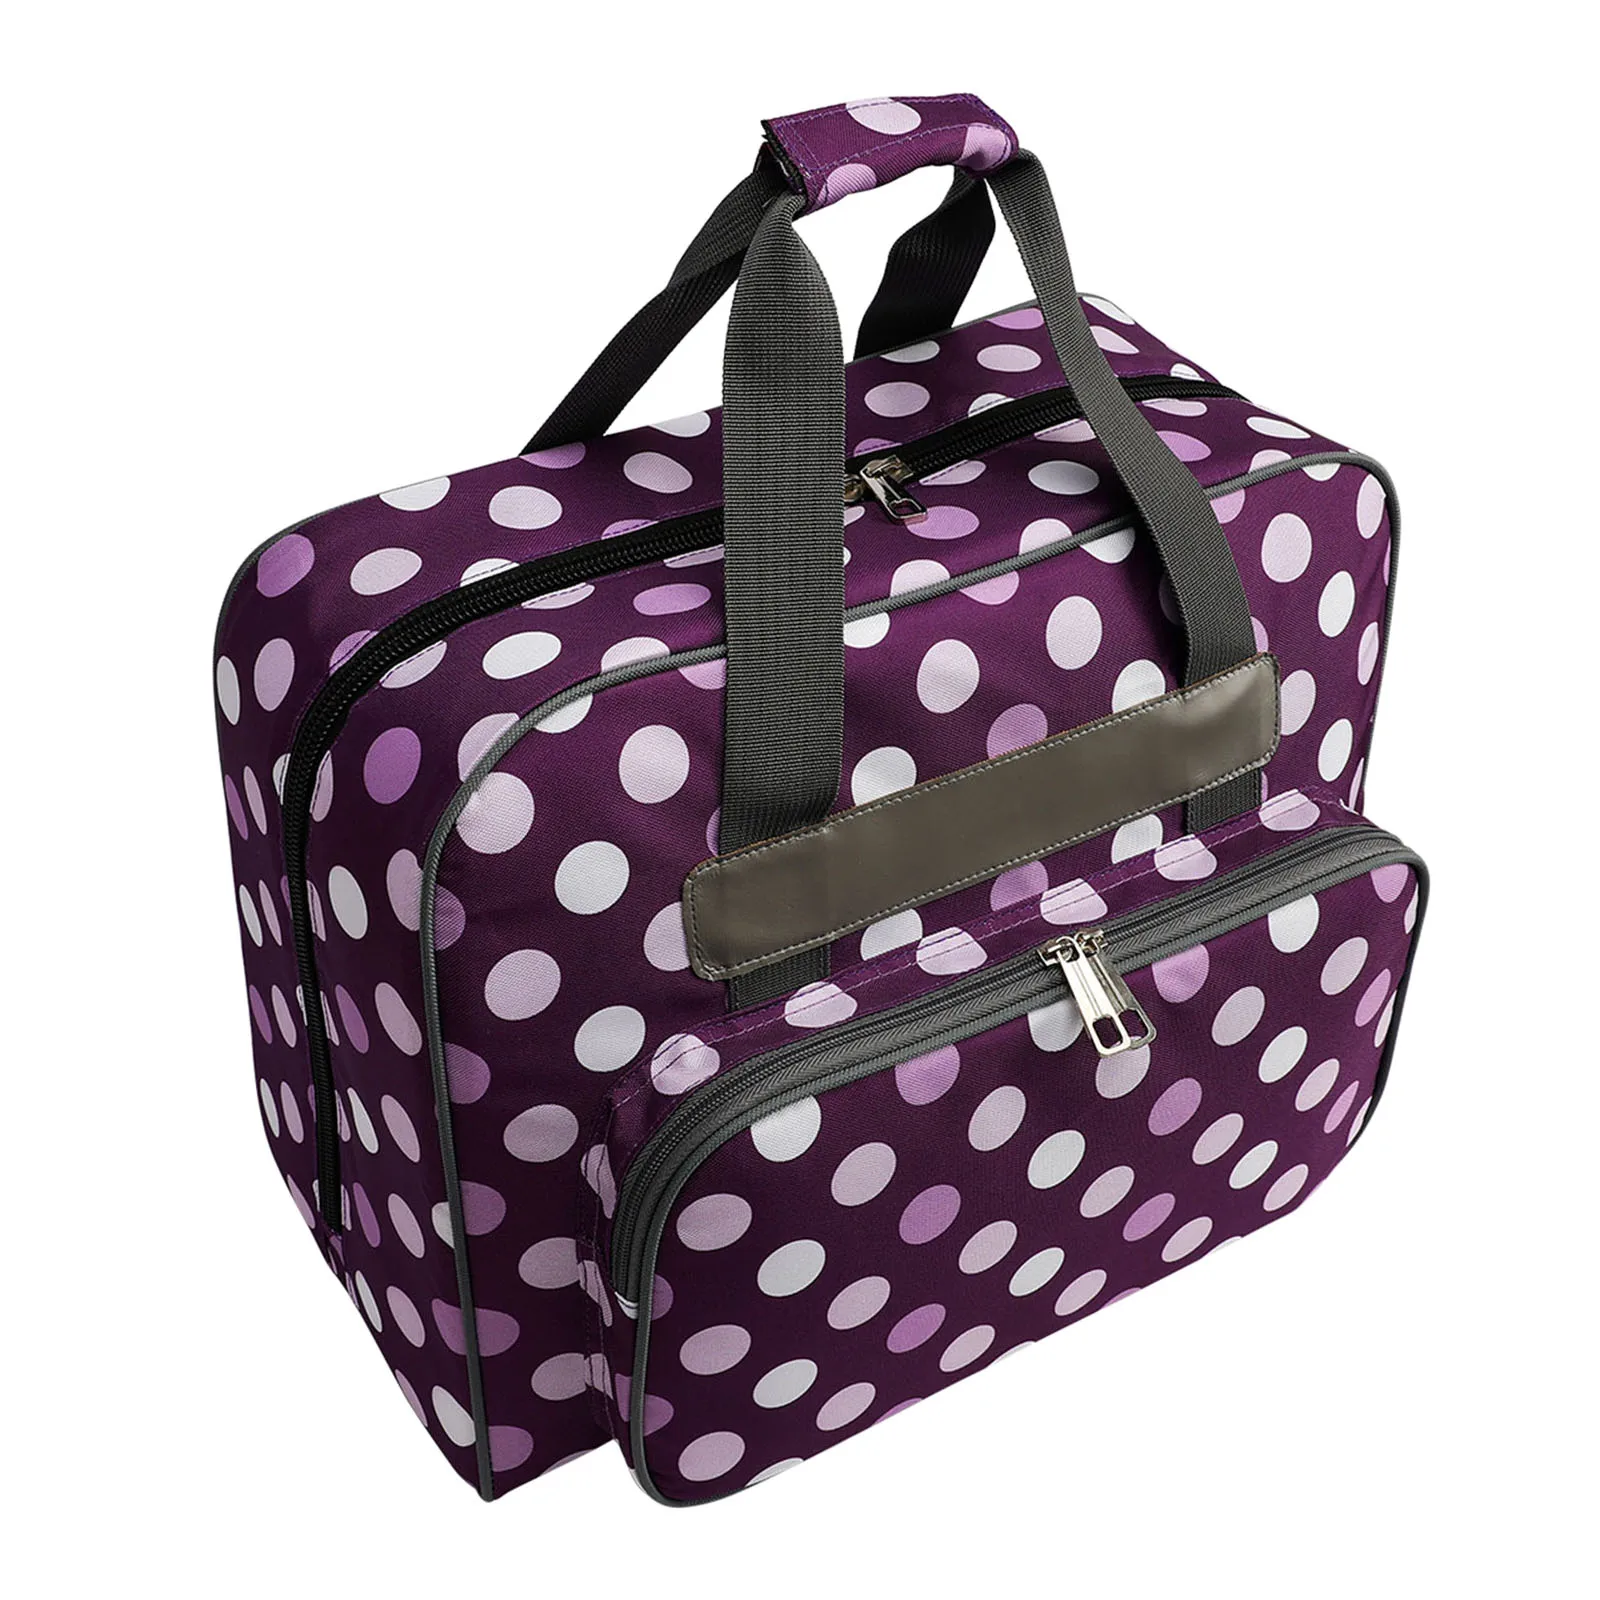 Sewing Machine Bag Large Capacity Dot Pattern Fashion Useful Storage Bags Oxford Cloth Home Use Tote Multi-functional